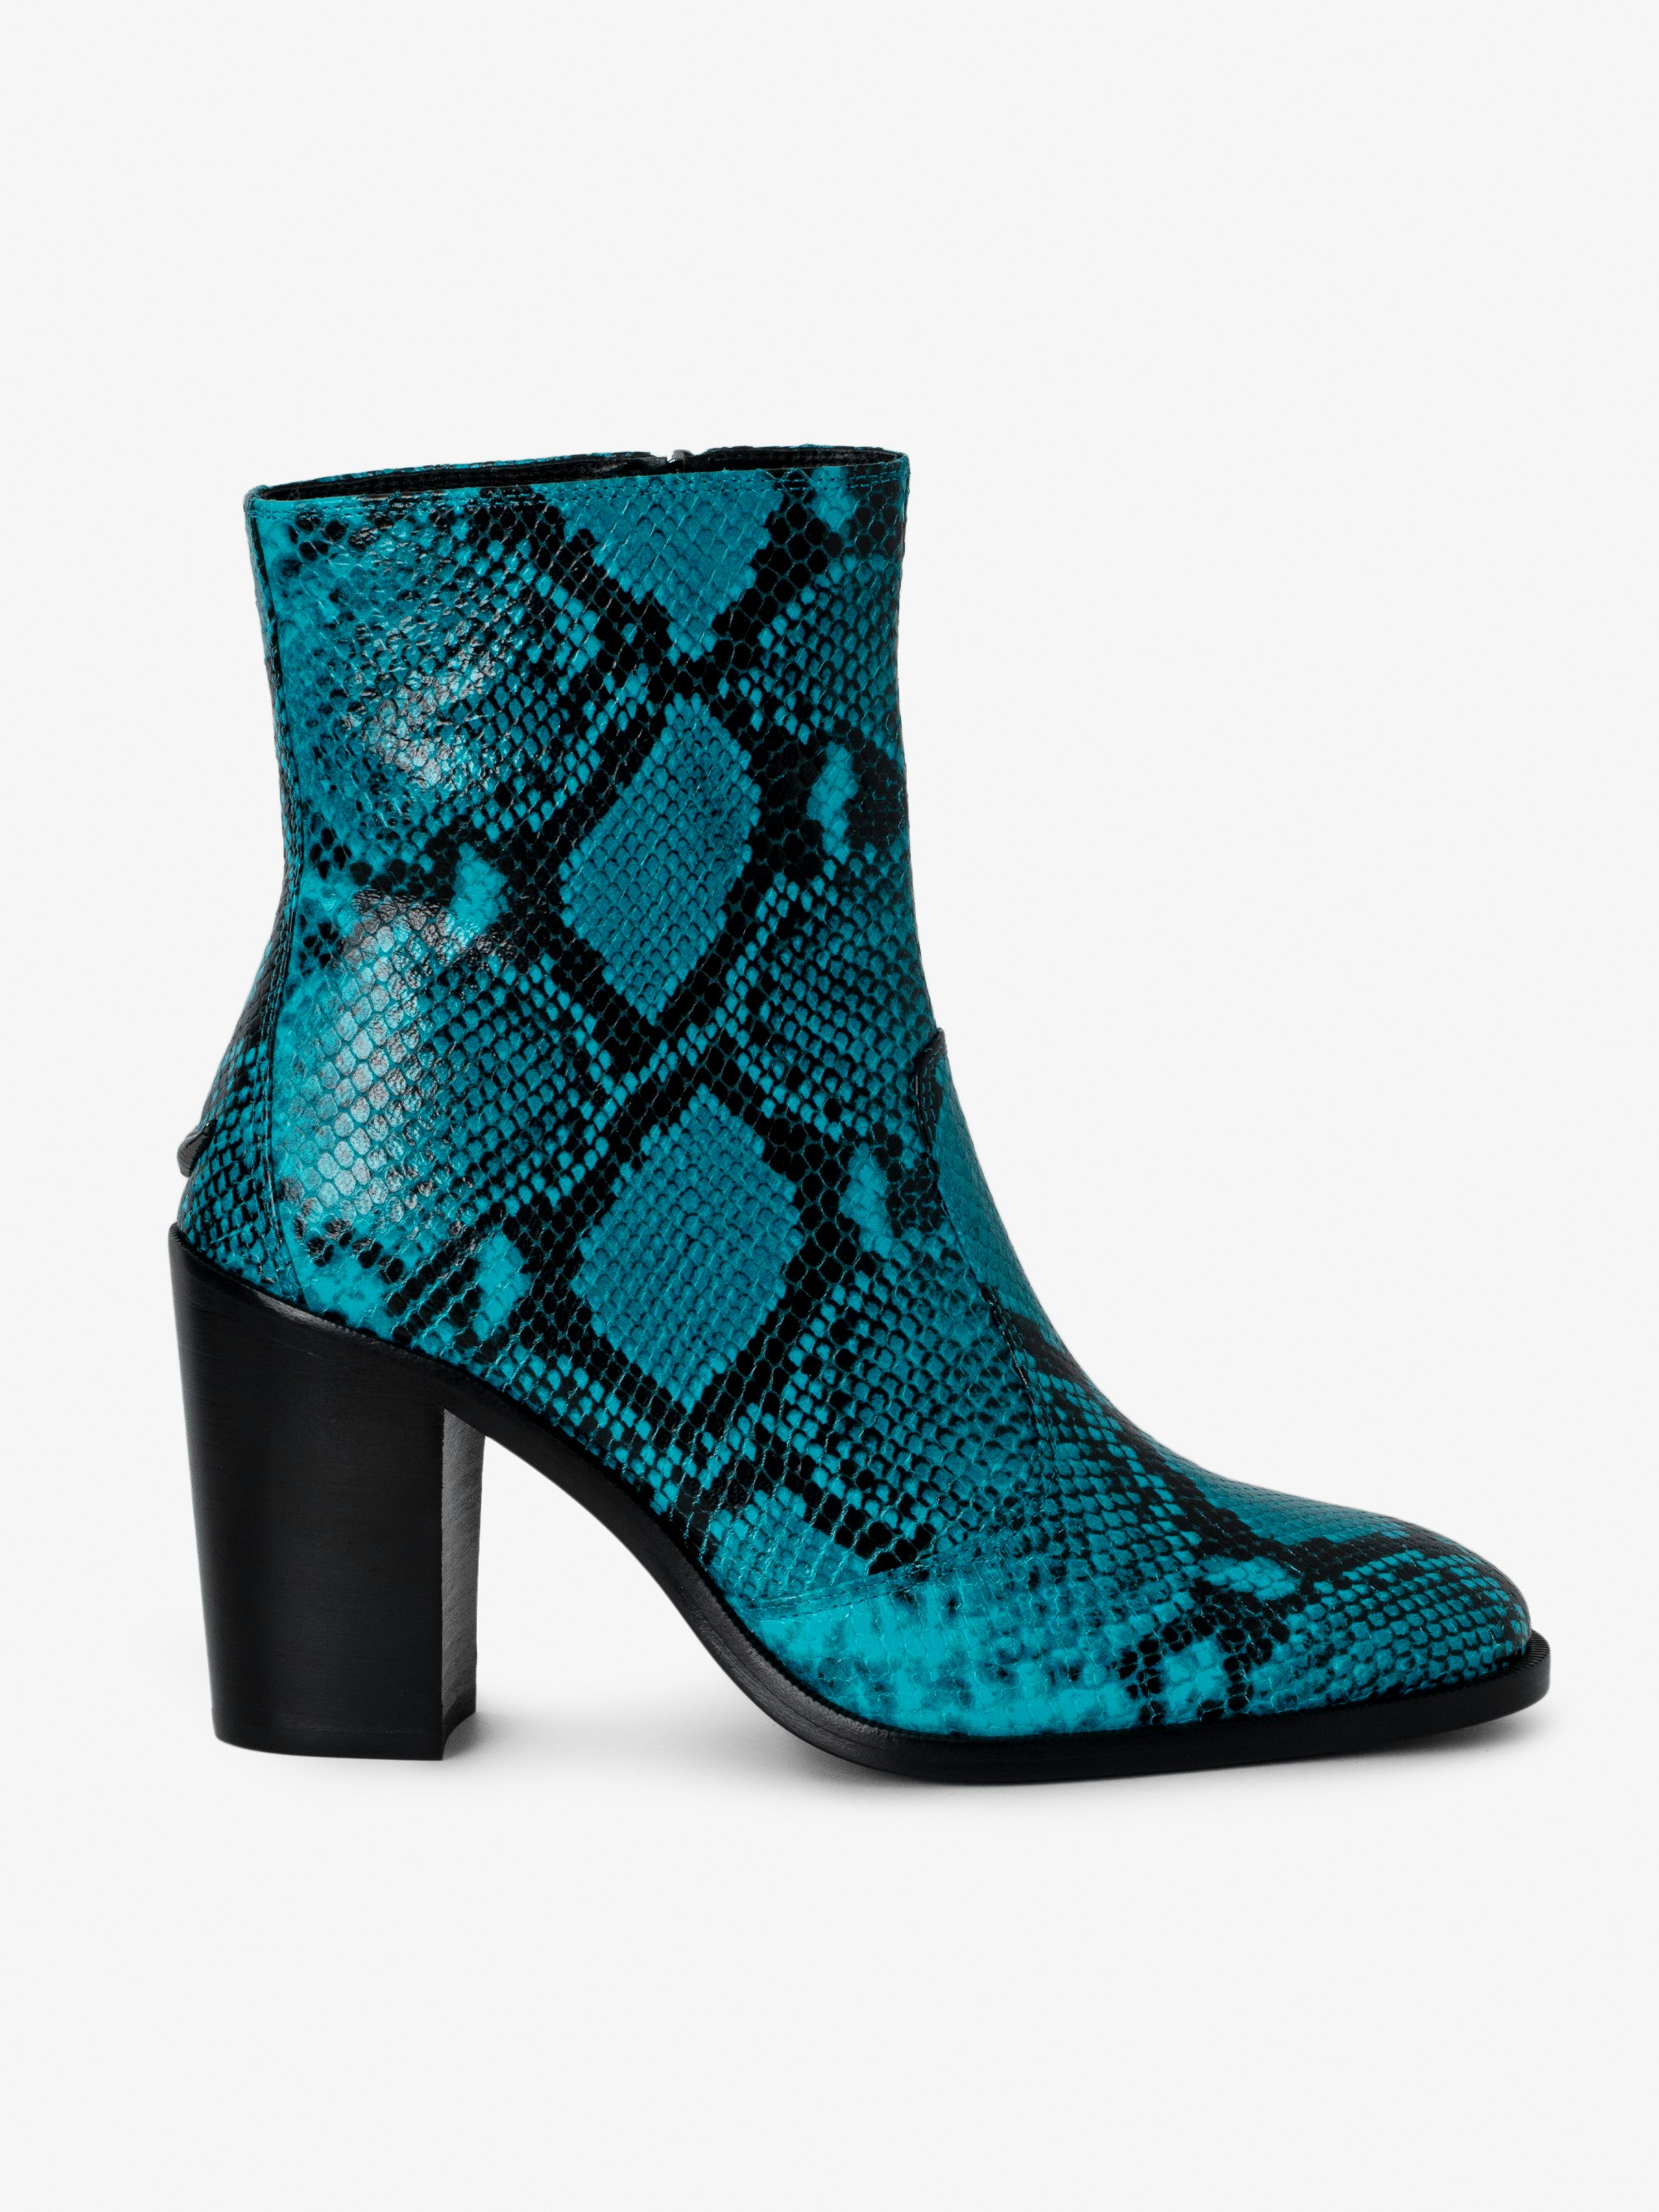 Preiser Ankle Boots - Blue snakeskin-effect leather ankle boots.